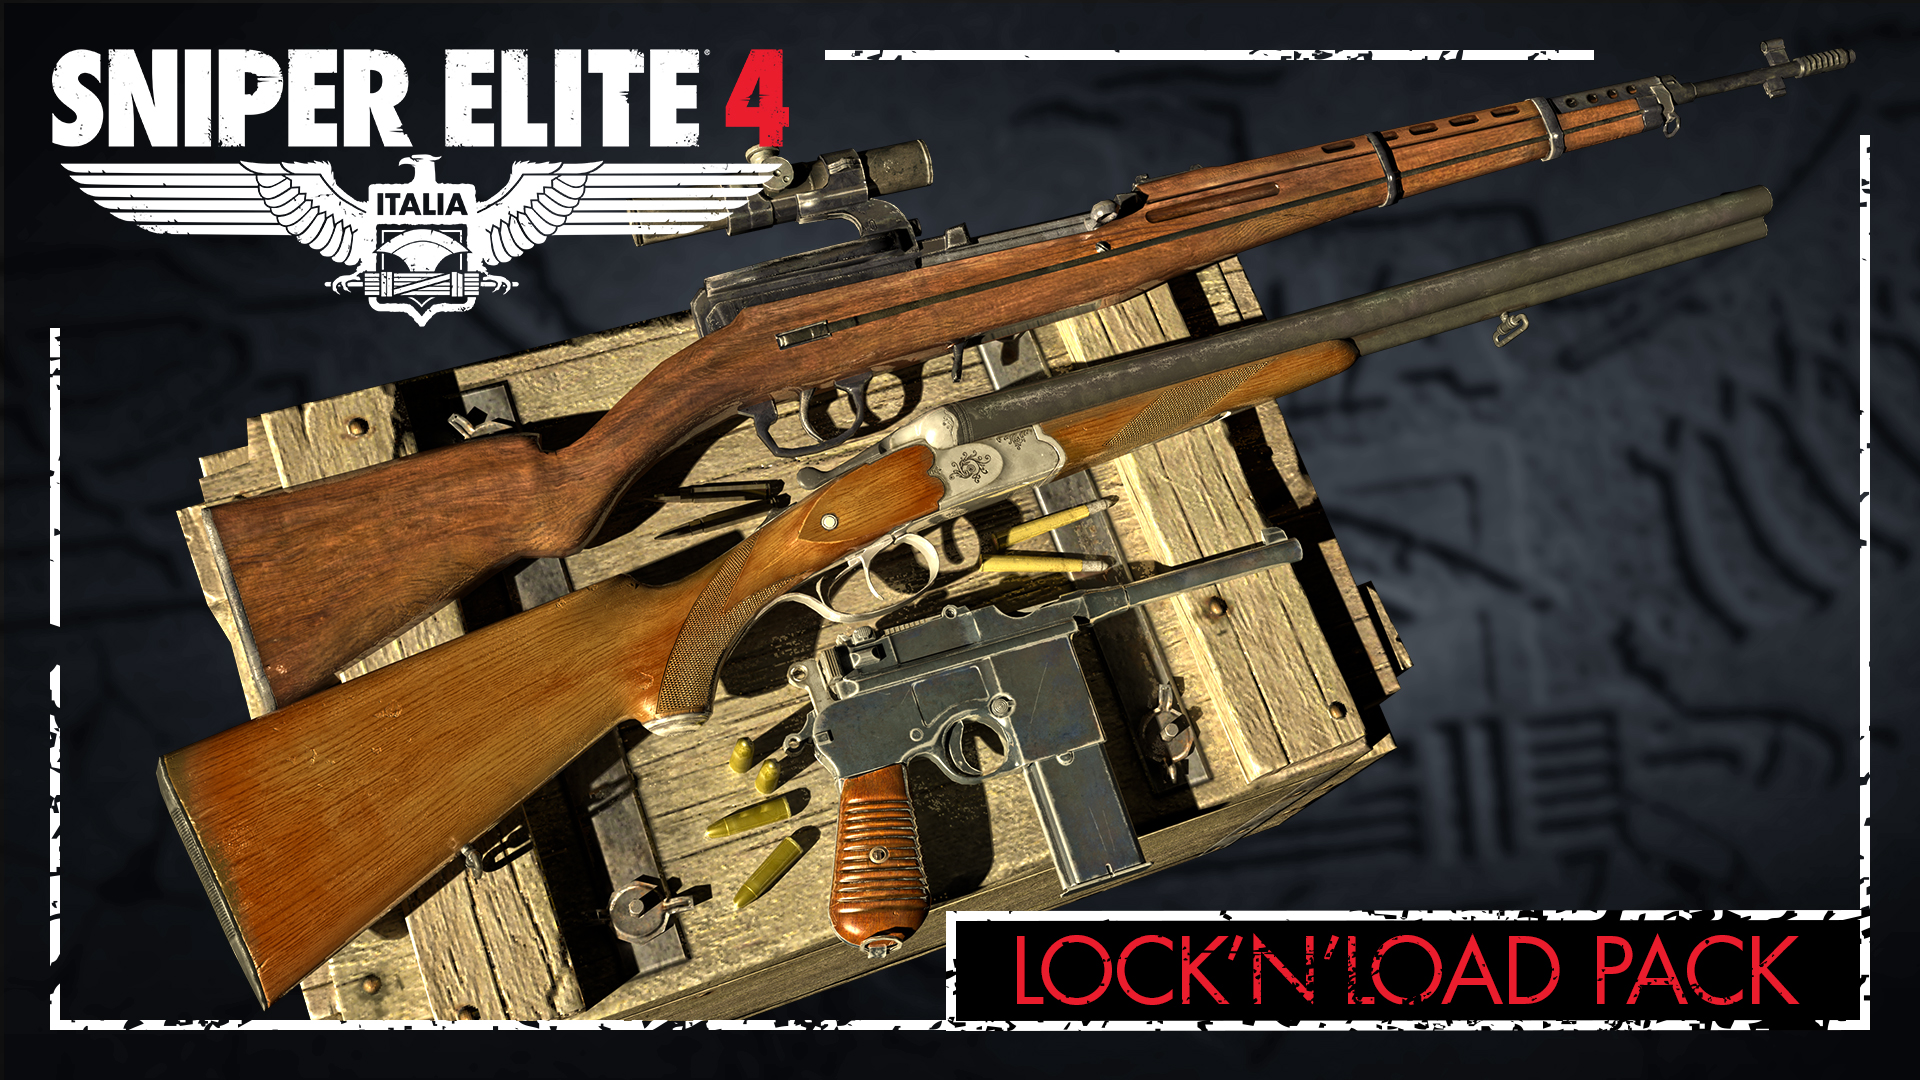 Sniper Elite 4 - Lock and Load Weapons Pack DLC Steam CD Key 4.51 $